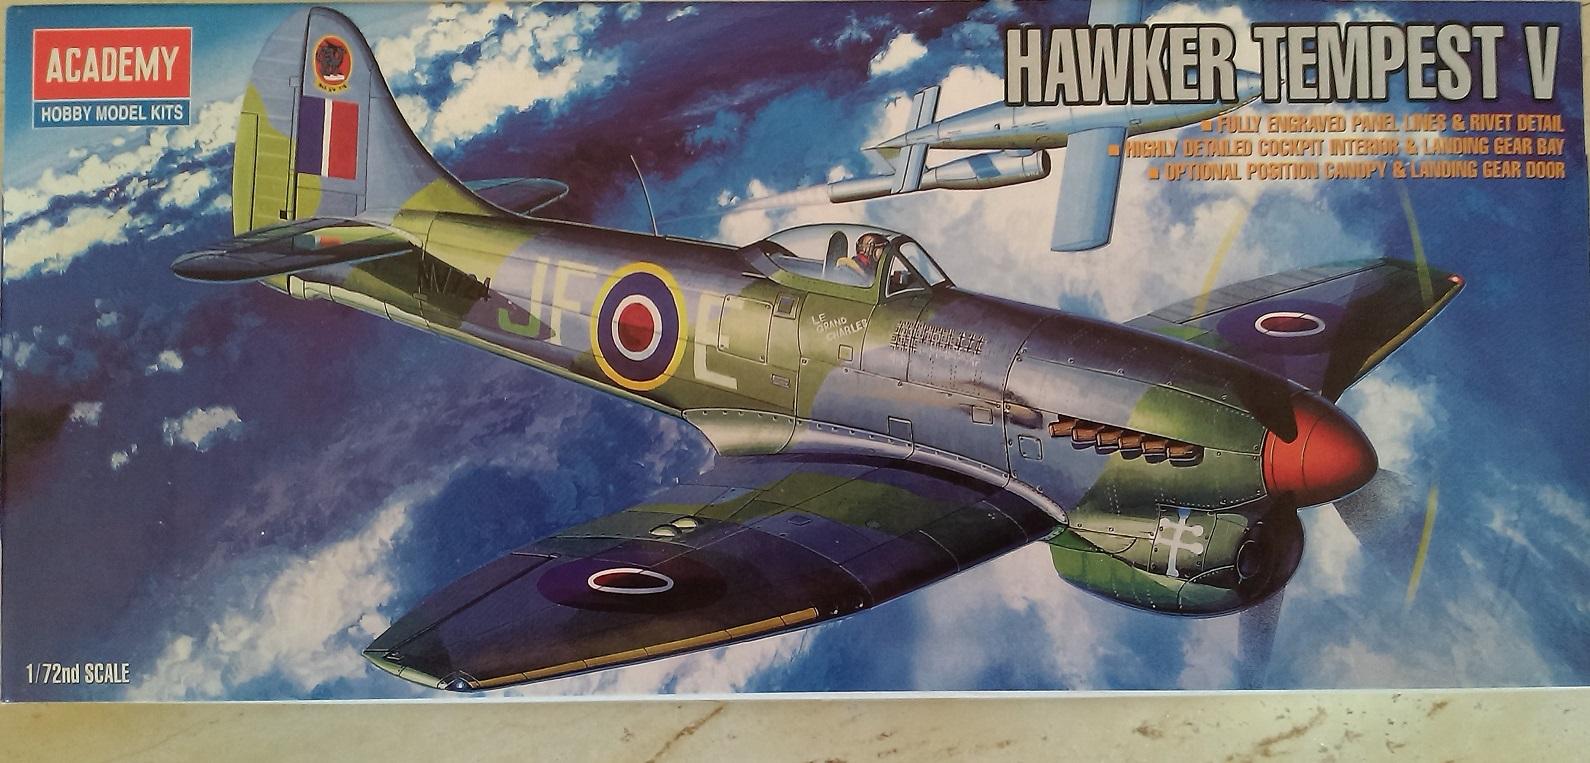 Academy Hawker Tempest V.